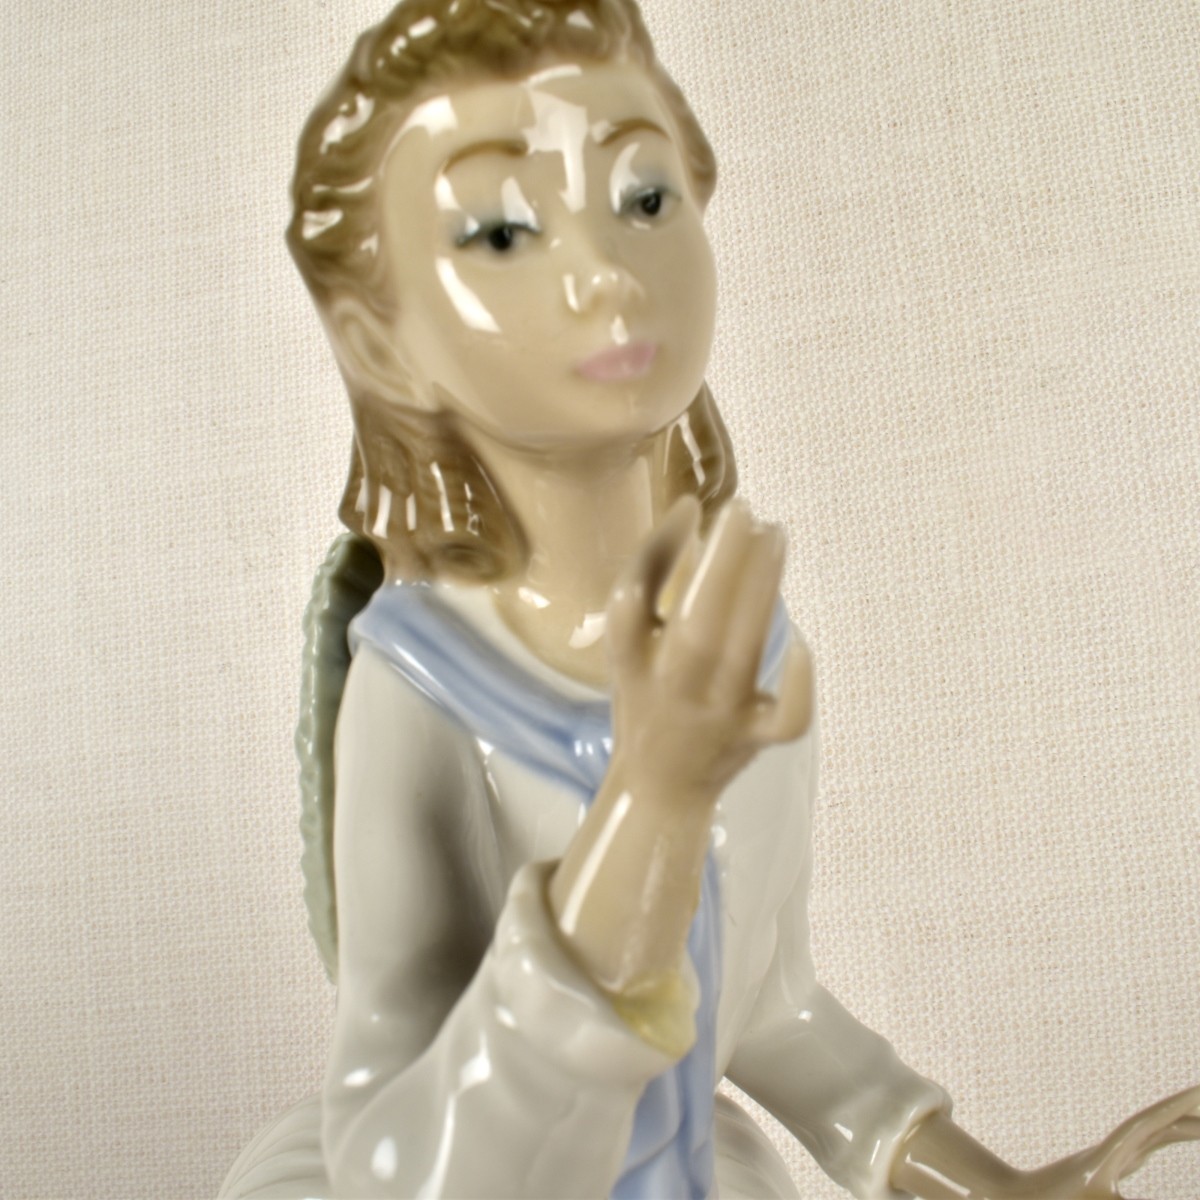 Lladro Figurine of a Girl with Flowers